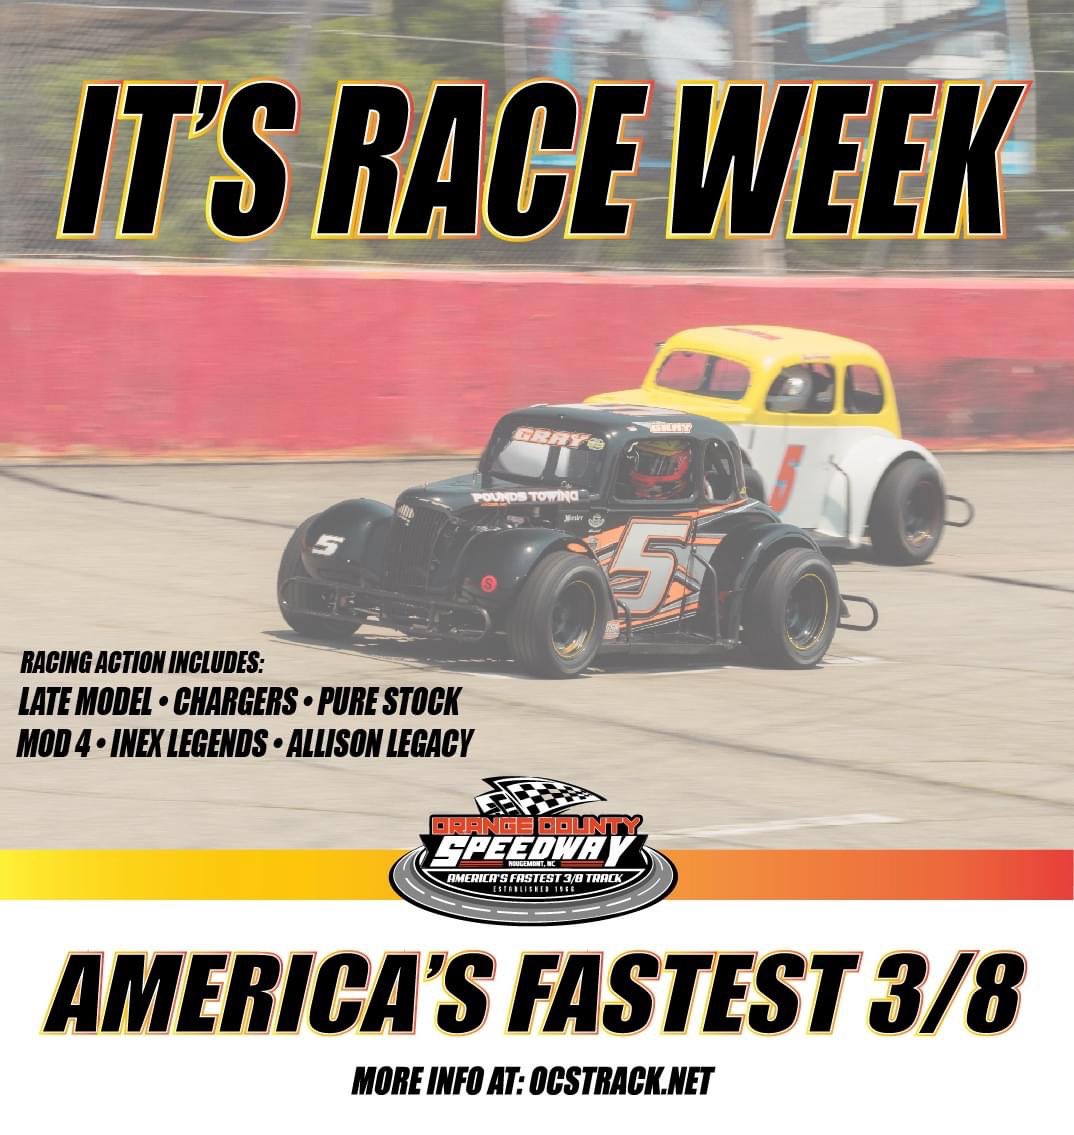 IT'S RACE WEEK We are back in action this Saturday night at America's Fastest 3/8. Racing action includes Late Model, Choice Automotive Chargers, Rougemont Storage Pure Stocks, Mod 4, @USLegendCars and @allison_legacy Grandstands Open at 5 PM ⏰ 5:30 PM 🟢 7 PM 🎟️ $15/$12/$2